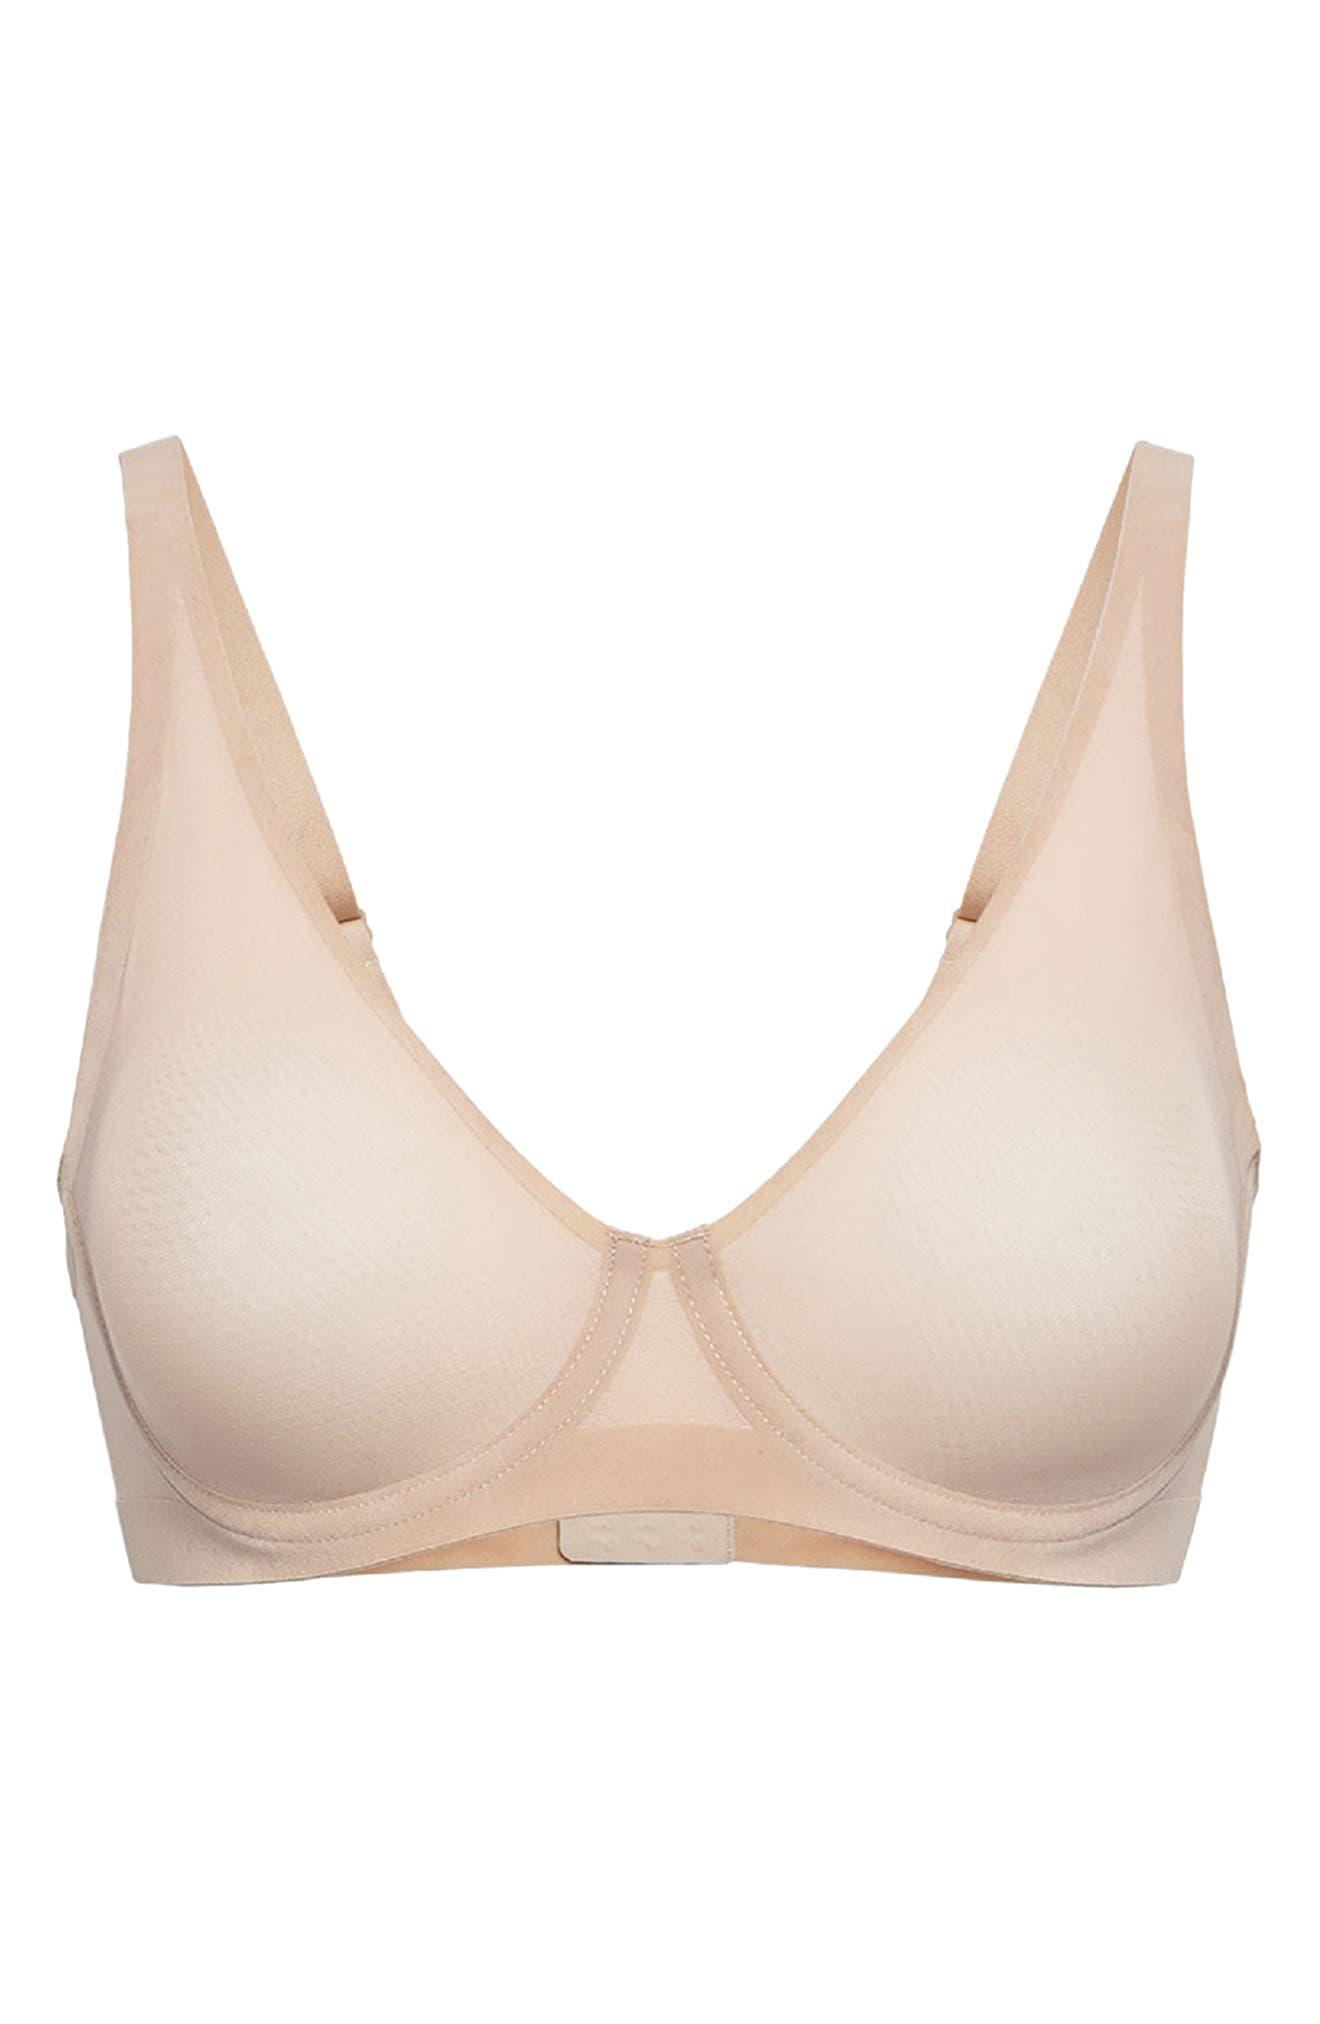 Wolford Tulle Full Cup Bra in Natural